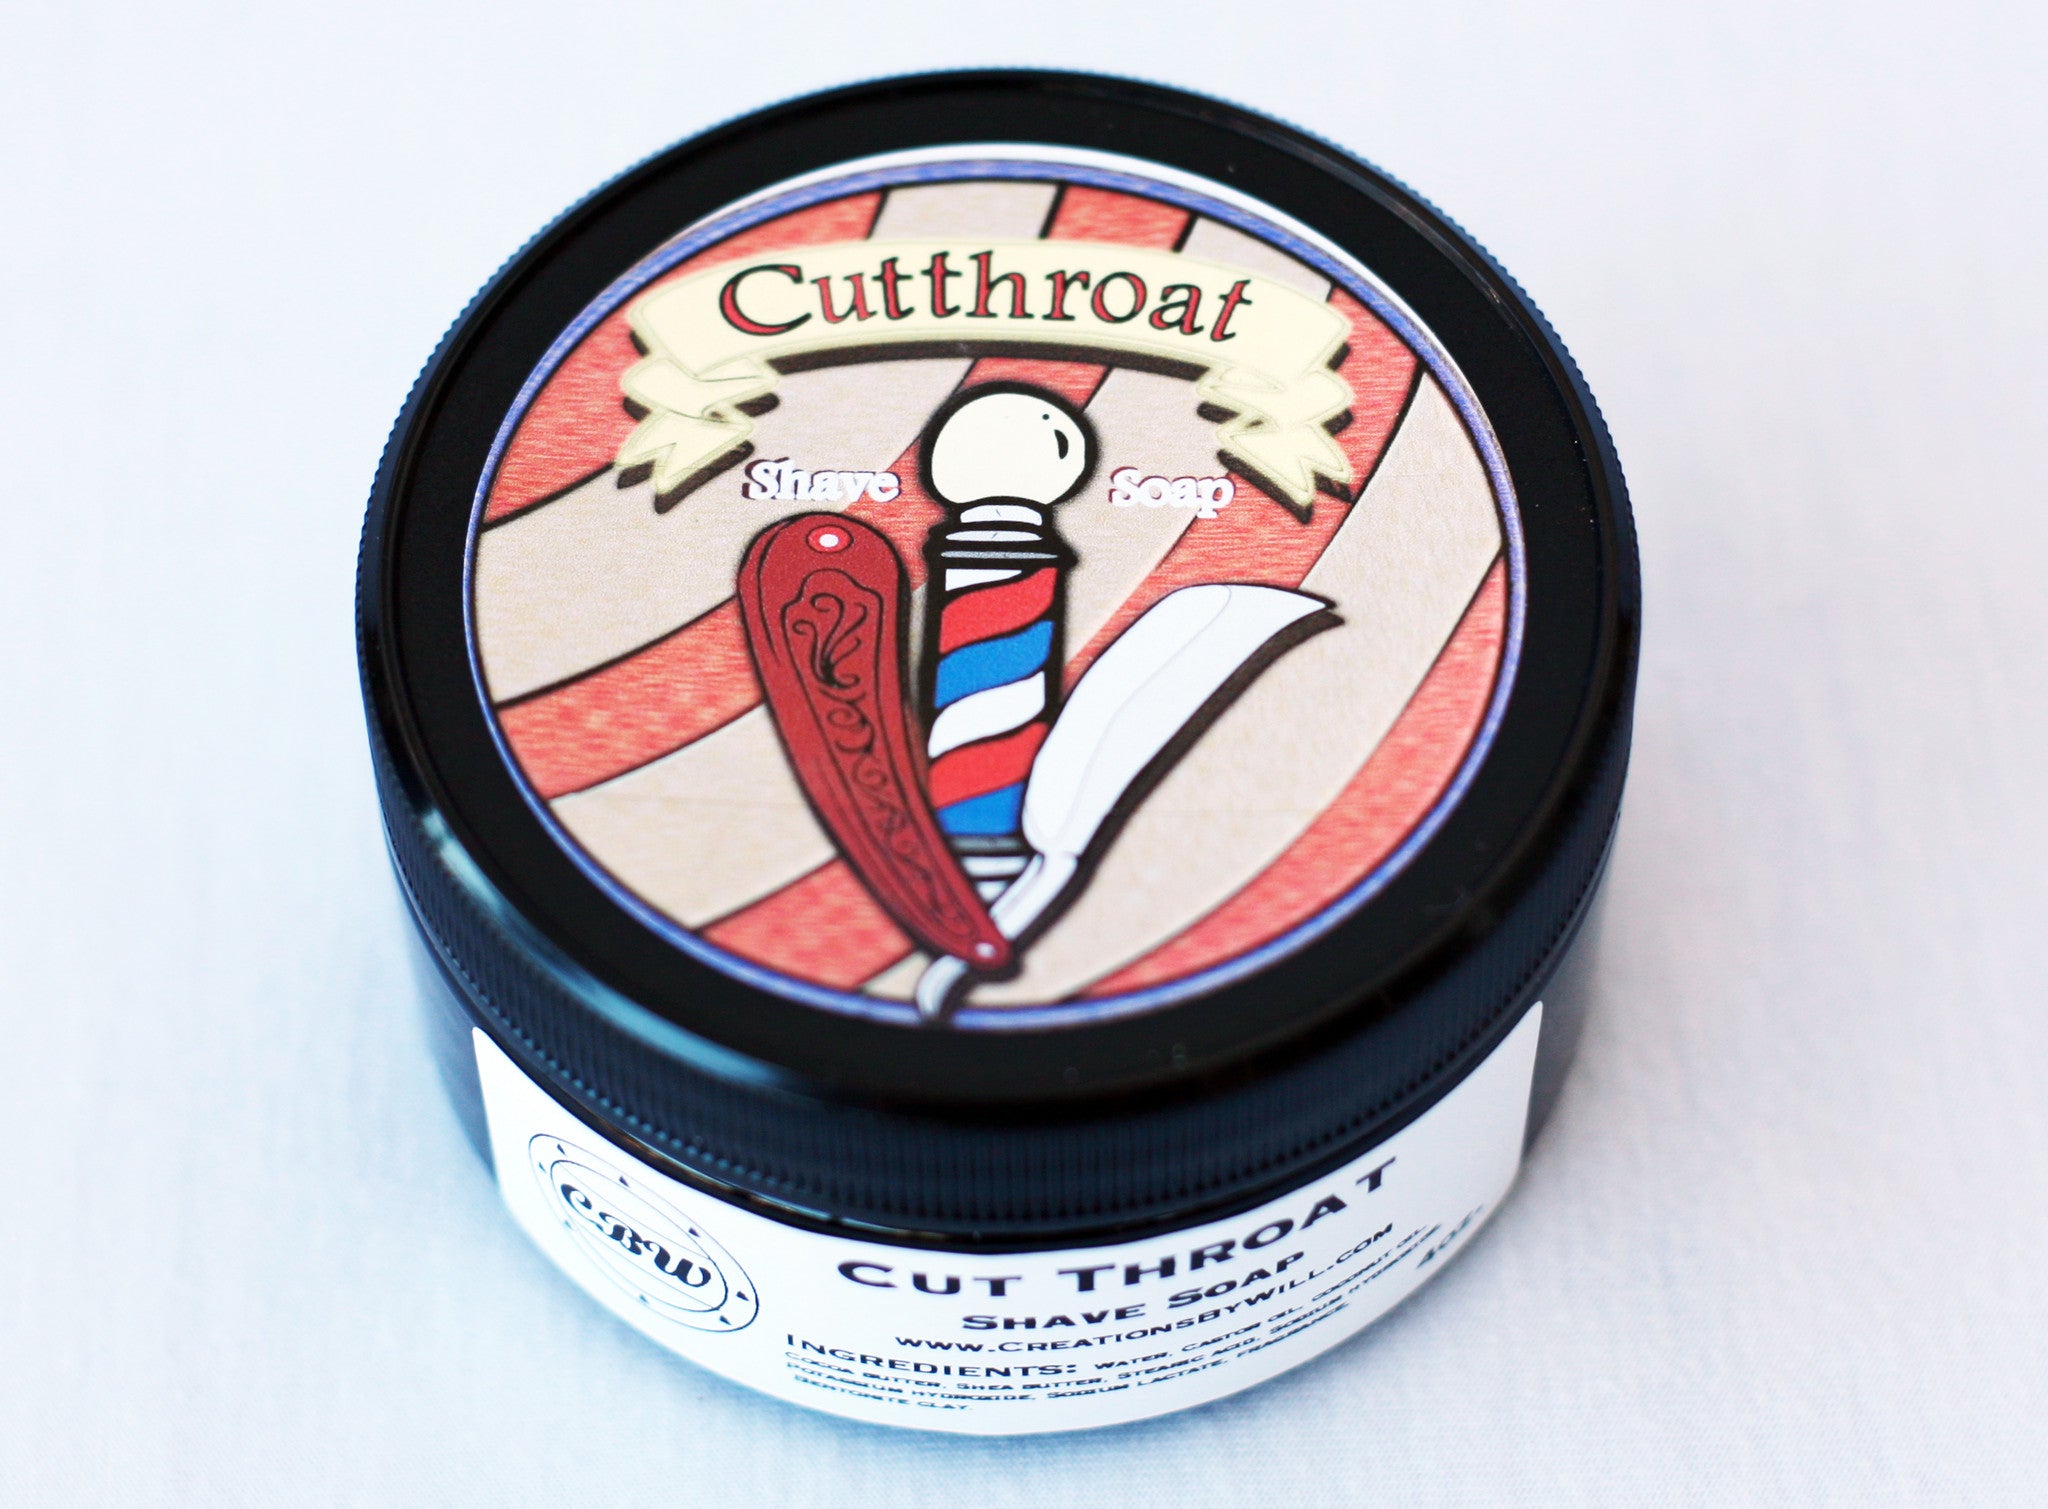 Cutthroat Vegan Shave Soap pictures in a plastic container - CreationsByWill